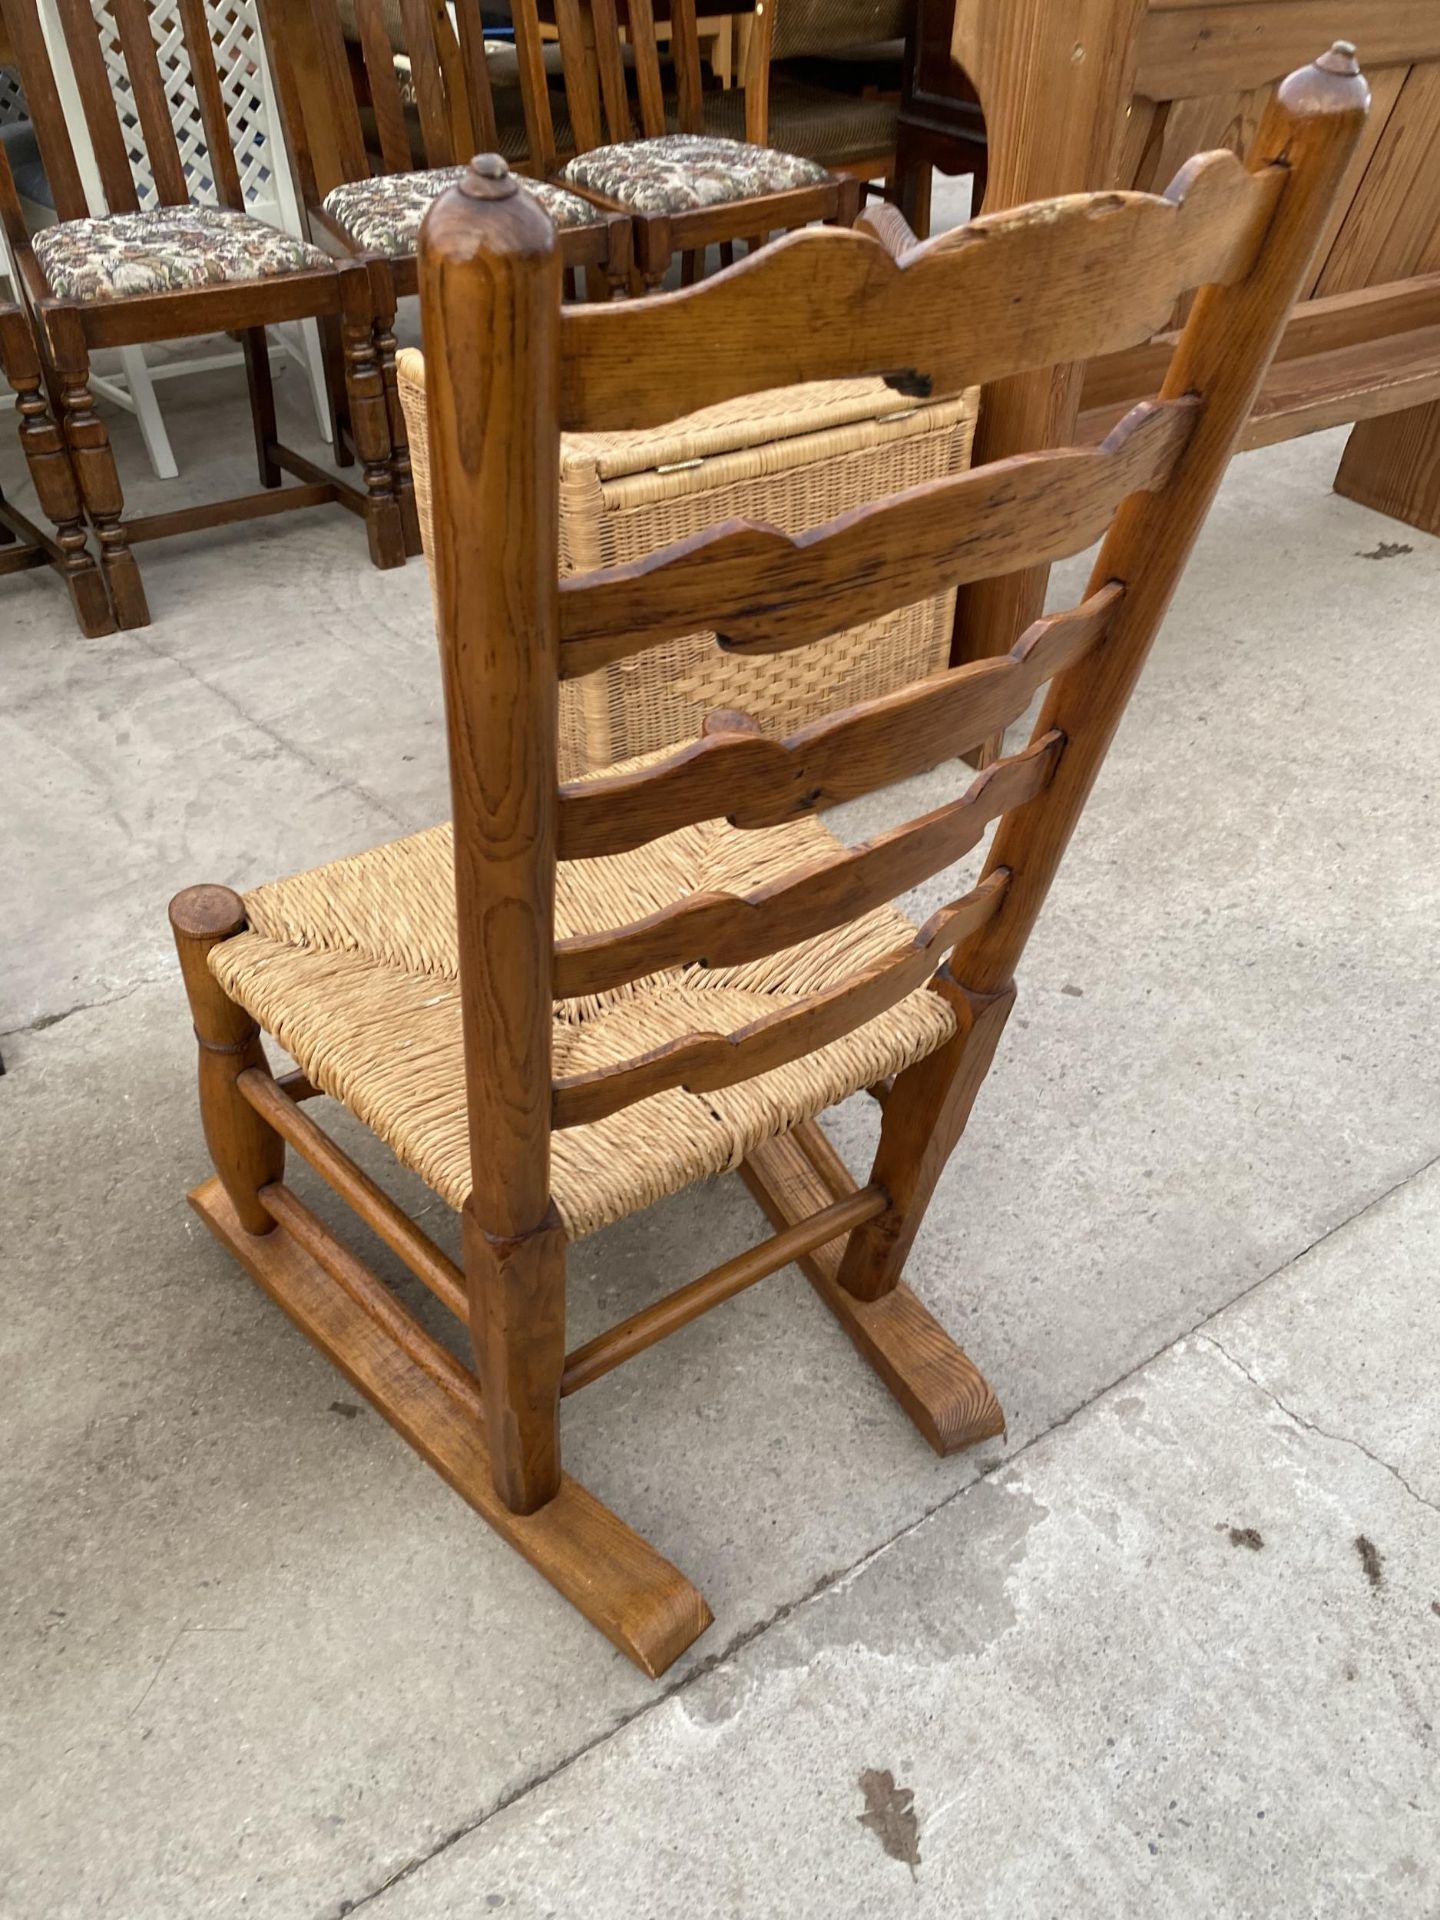 A 19TH CENTURY STYLE ELM ROCKING CHAIR WITH LADDERBACK AND RUSH SEAT - Image 3 of 3